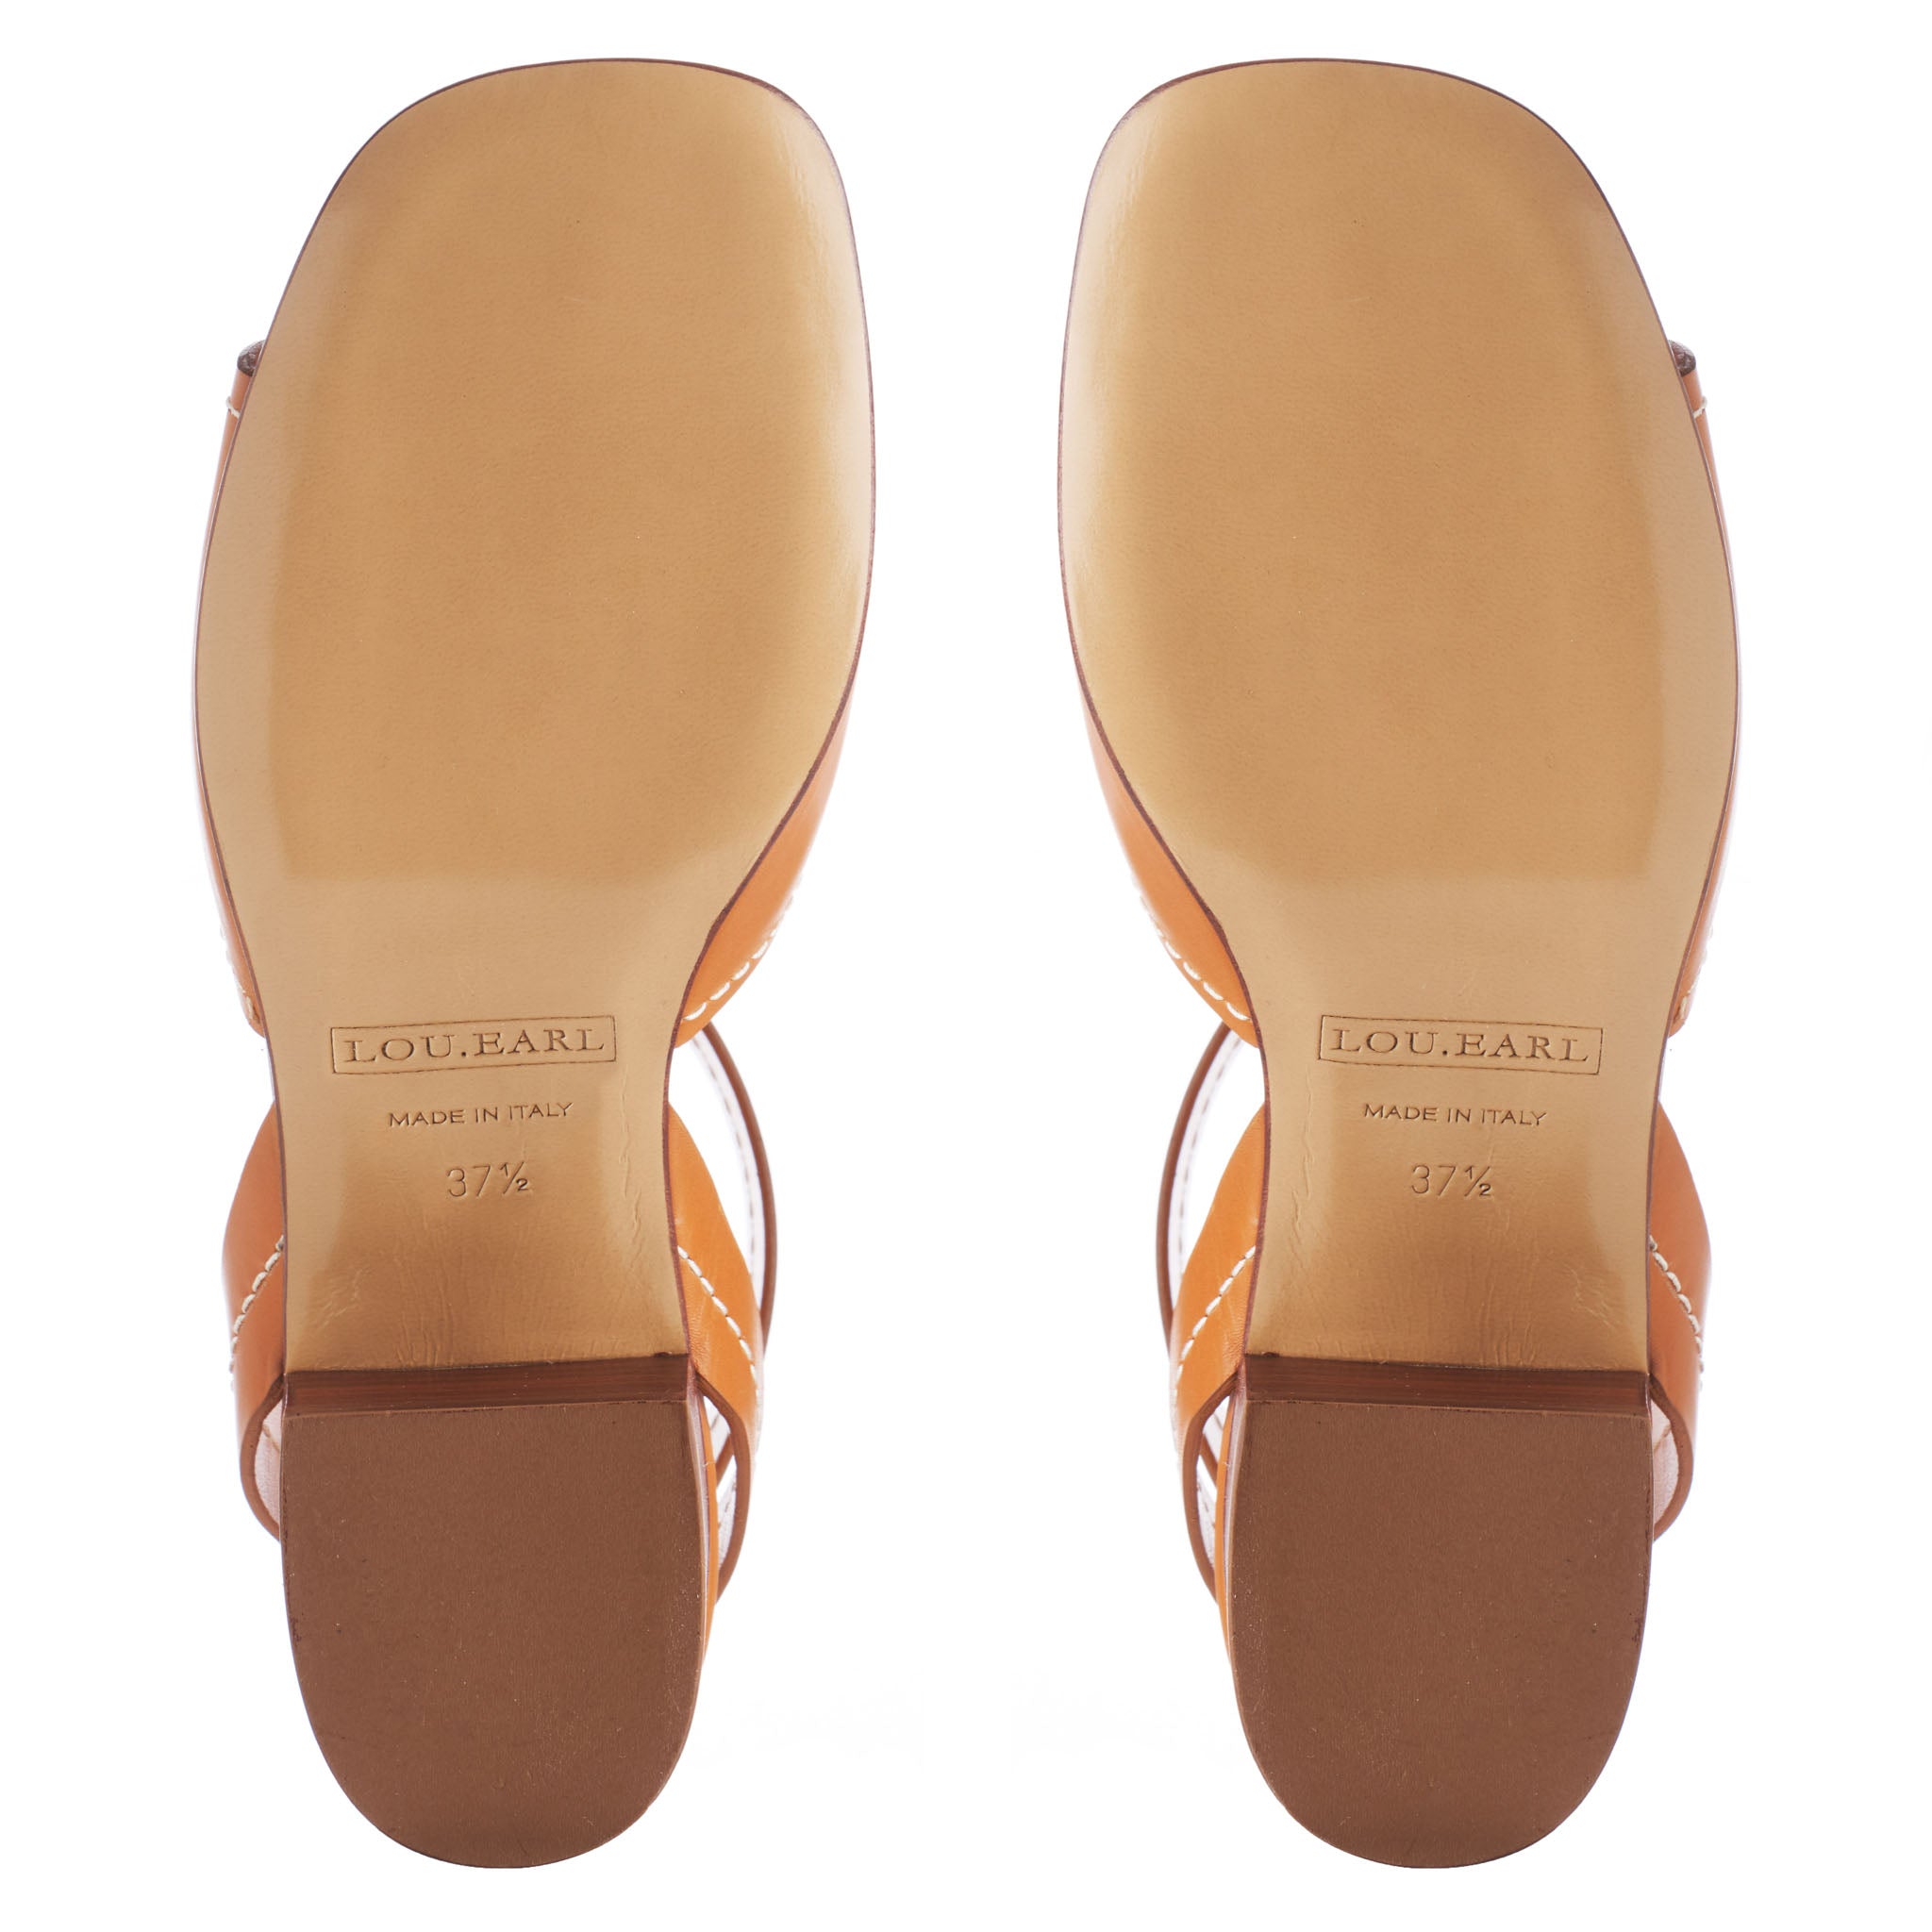 cognac square toe sandals with block heel and leather outsole